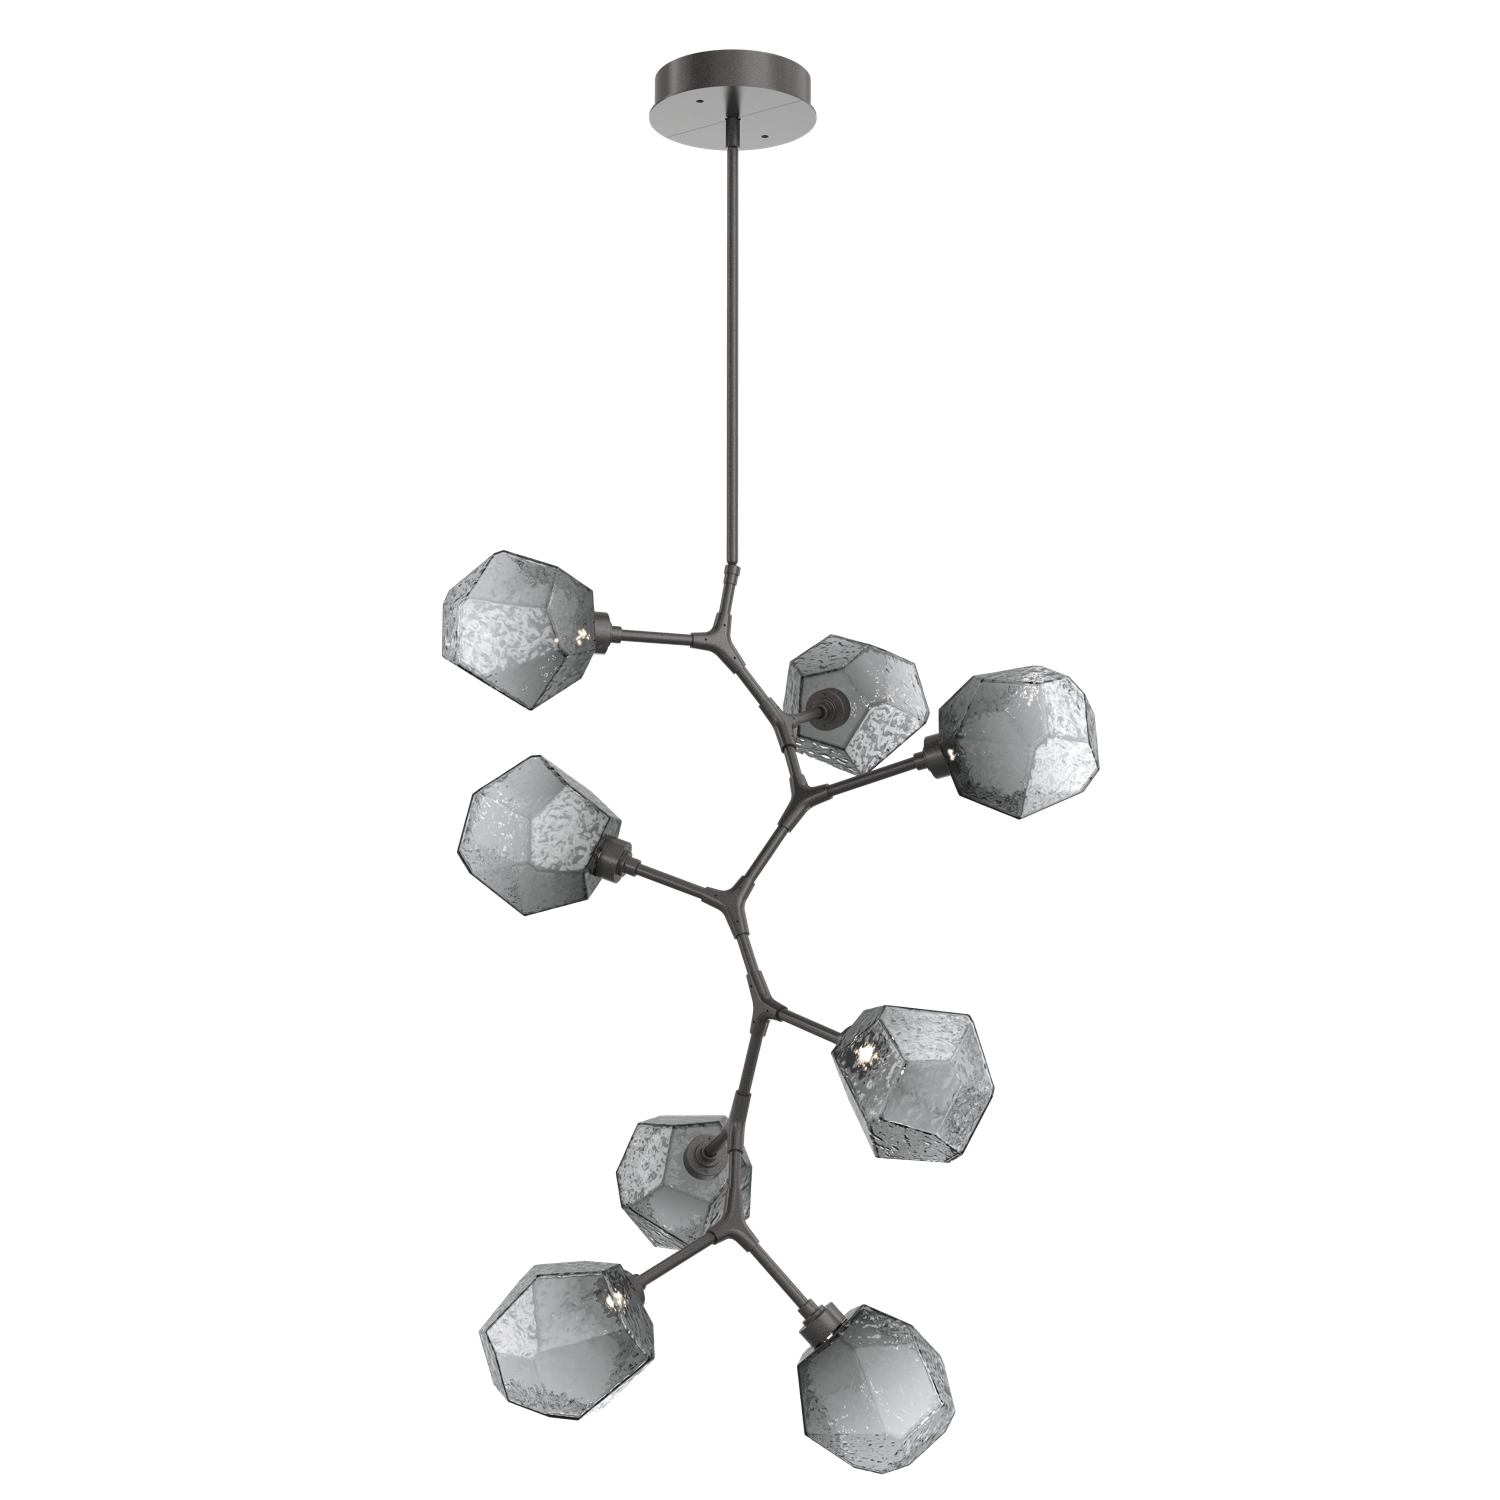 CHB0039-VB-GP-S-Hammerton-Studio-Gem-8-light-modern-vine-chandelier-with-graphite-finish-and-smoke-blown-glass-shades-and-LED-lamping